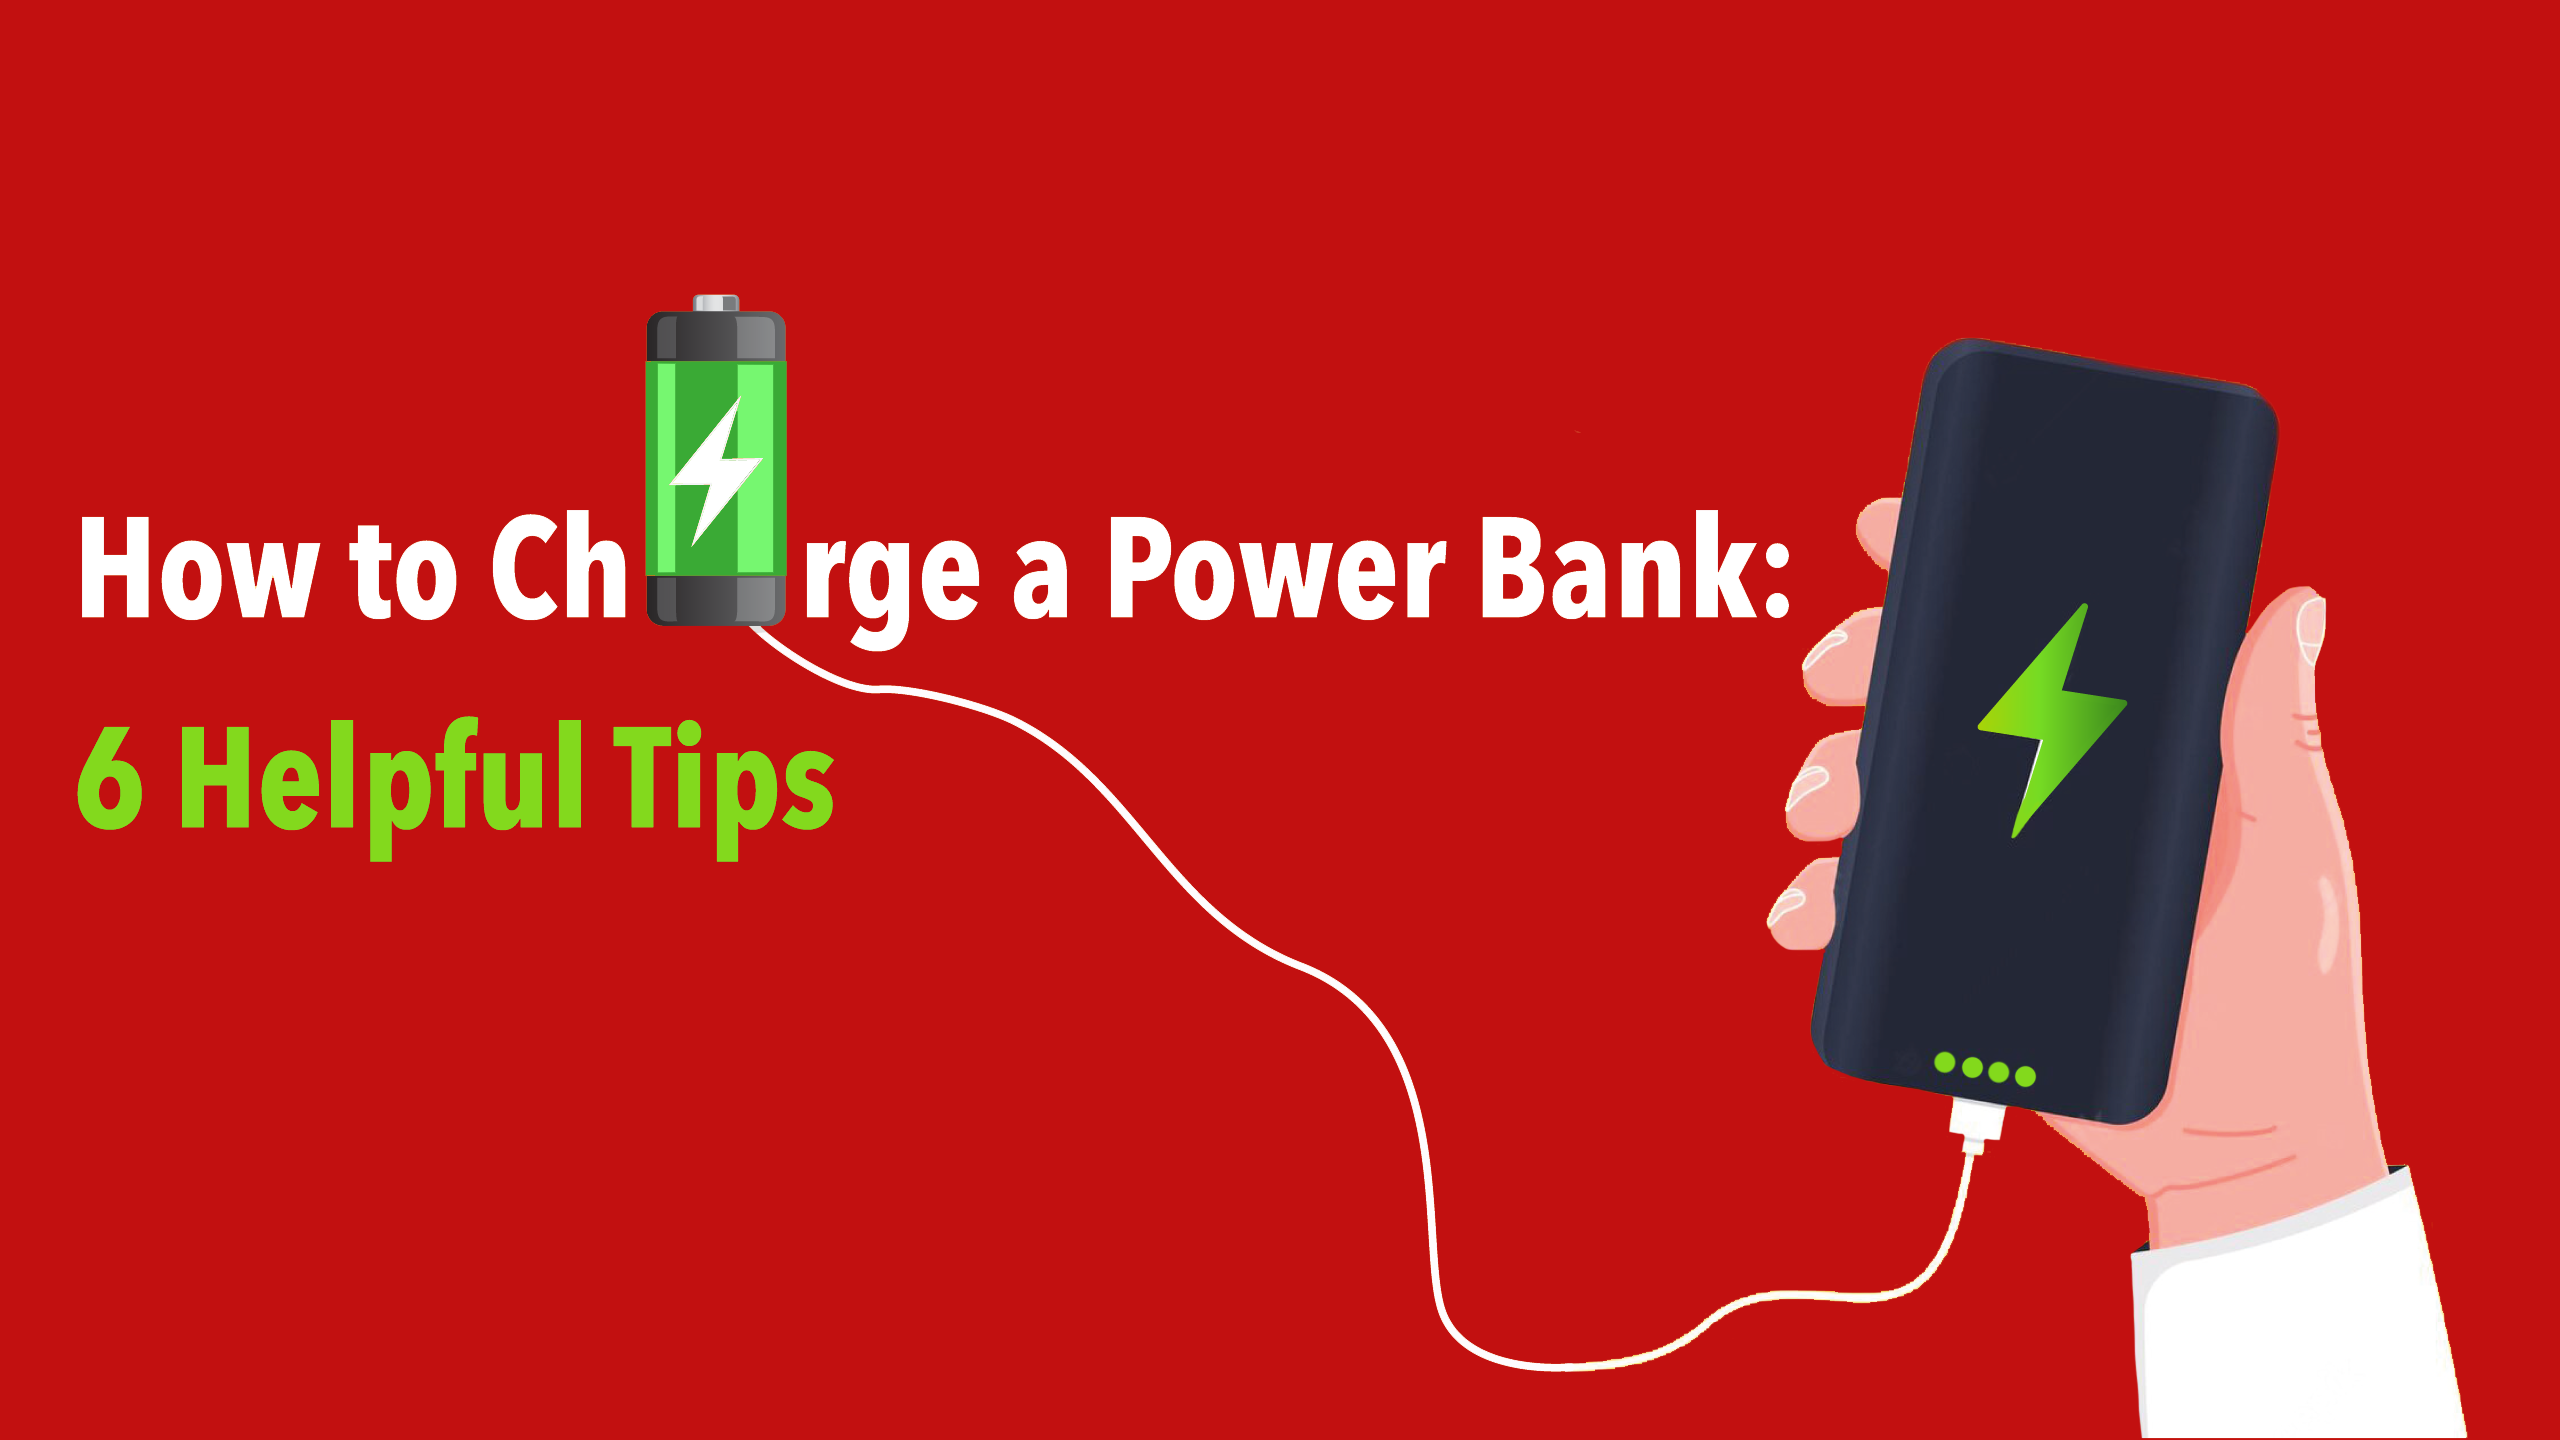 USB Memory Direct How-To-Charge-Power-Bank Banner Image